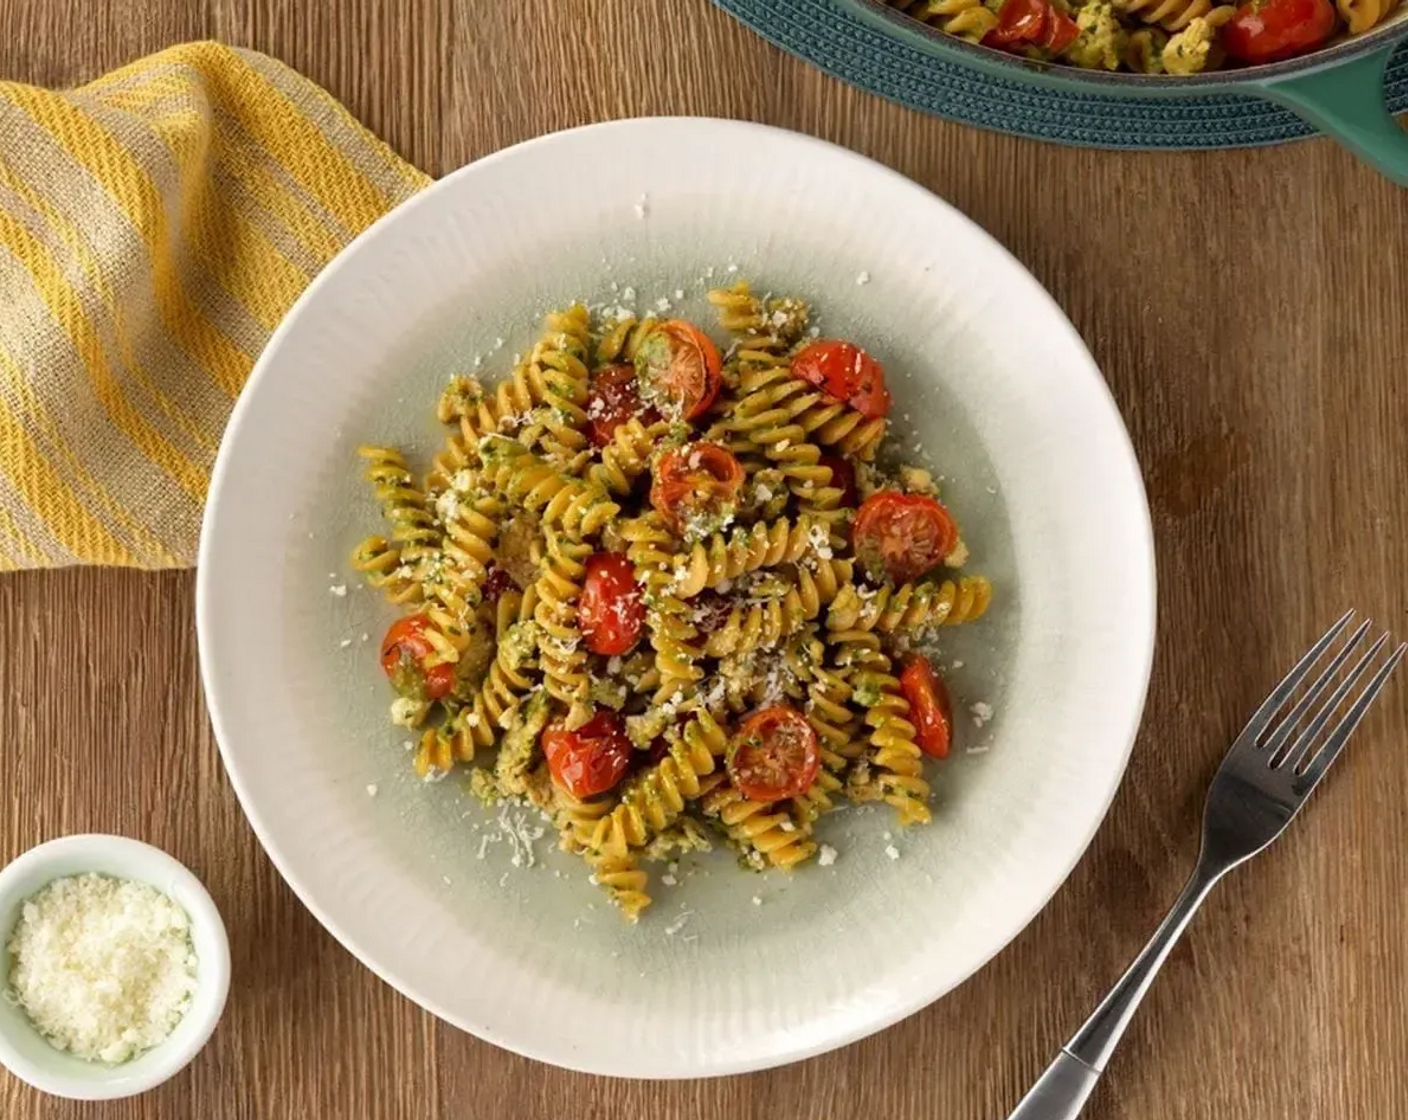 Chickpea Rotini with Chicken, Pesto, and Oven Roasted Tomatoes